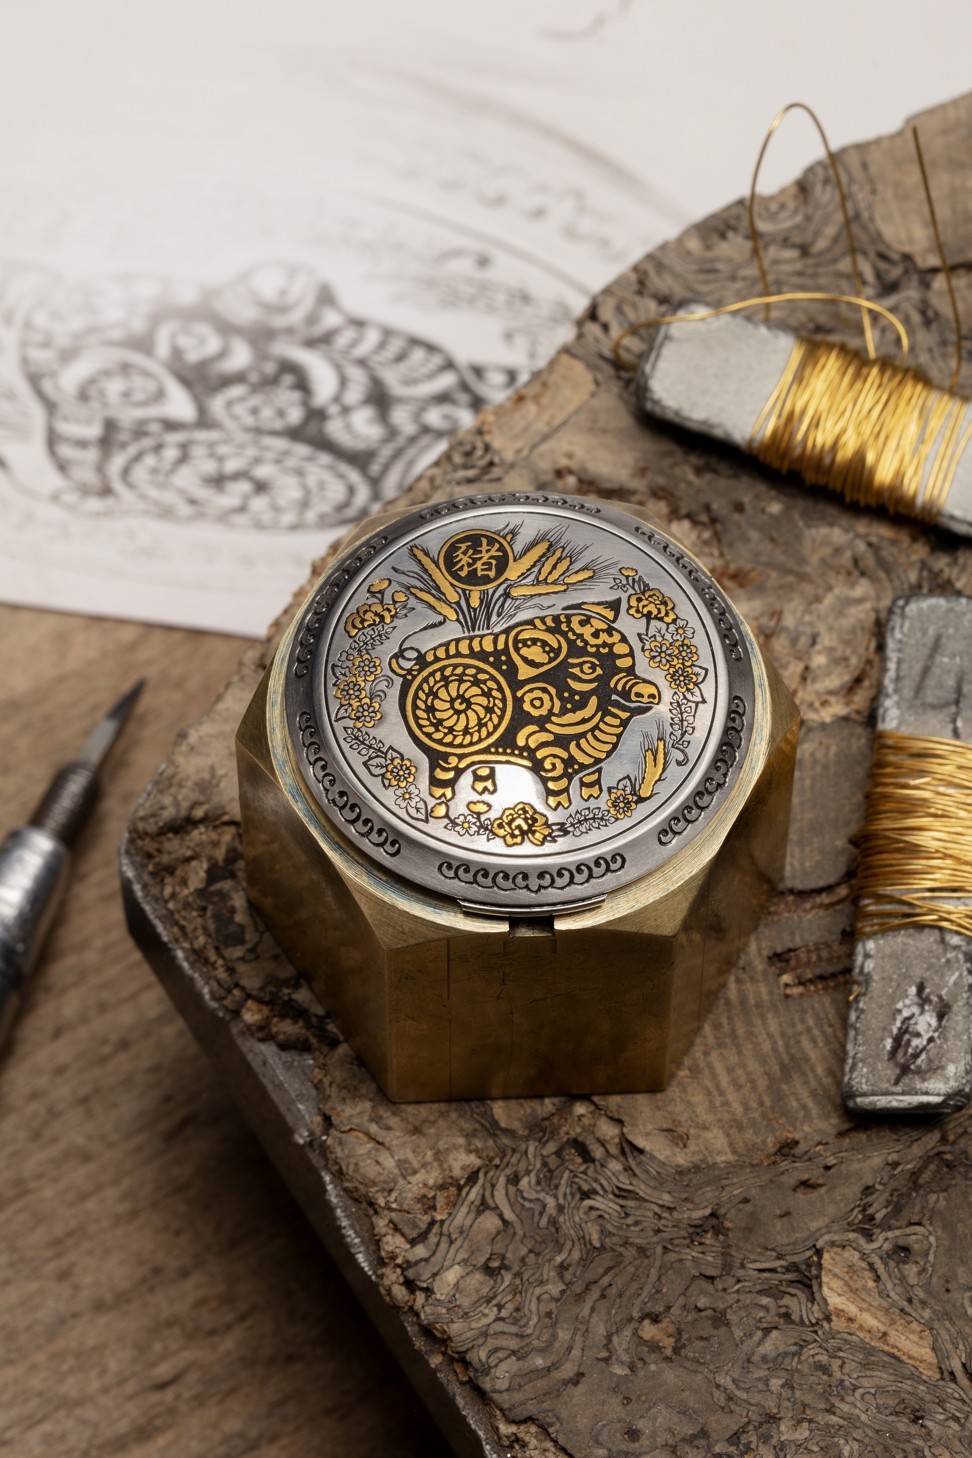 Paneria’s Luminor Sealand Year of the Pig timepiece features a hand-engraved cover inlaid with gold thread.